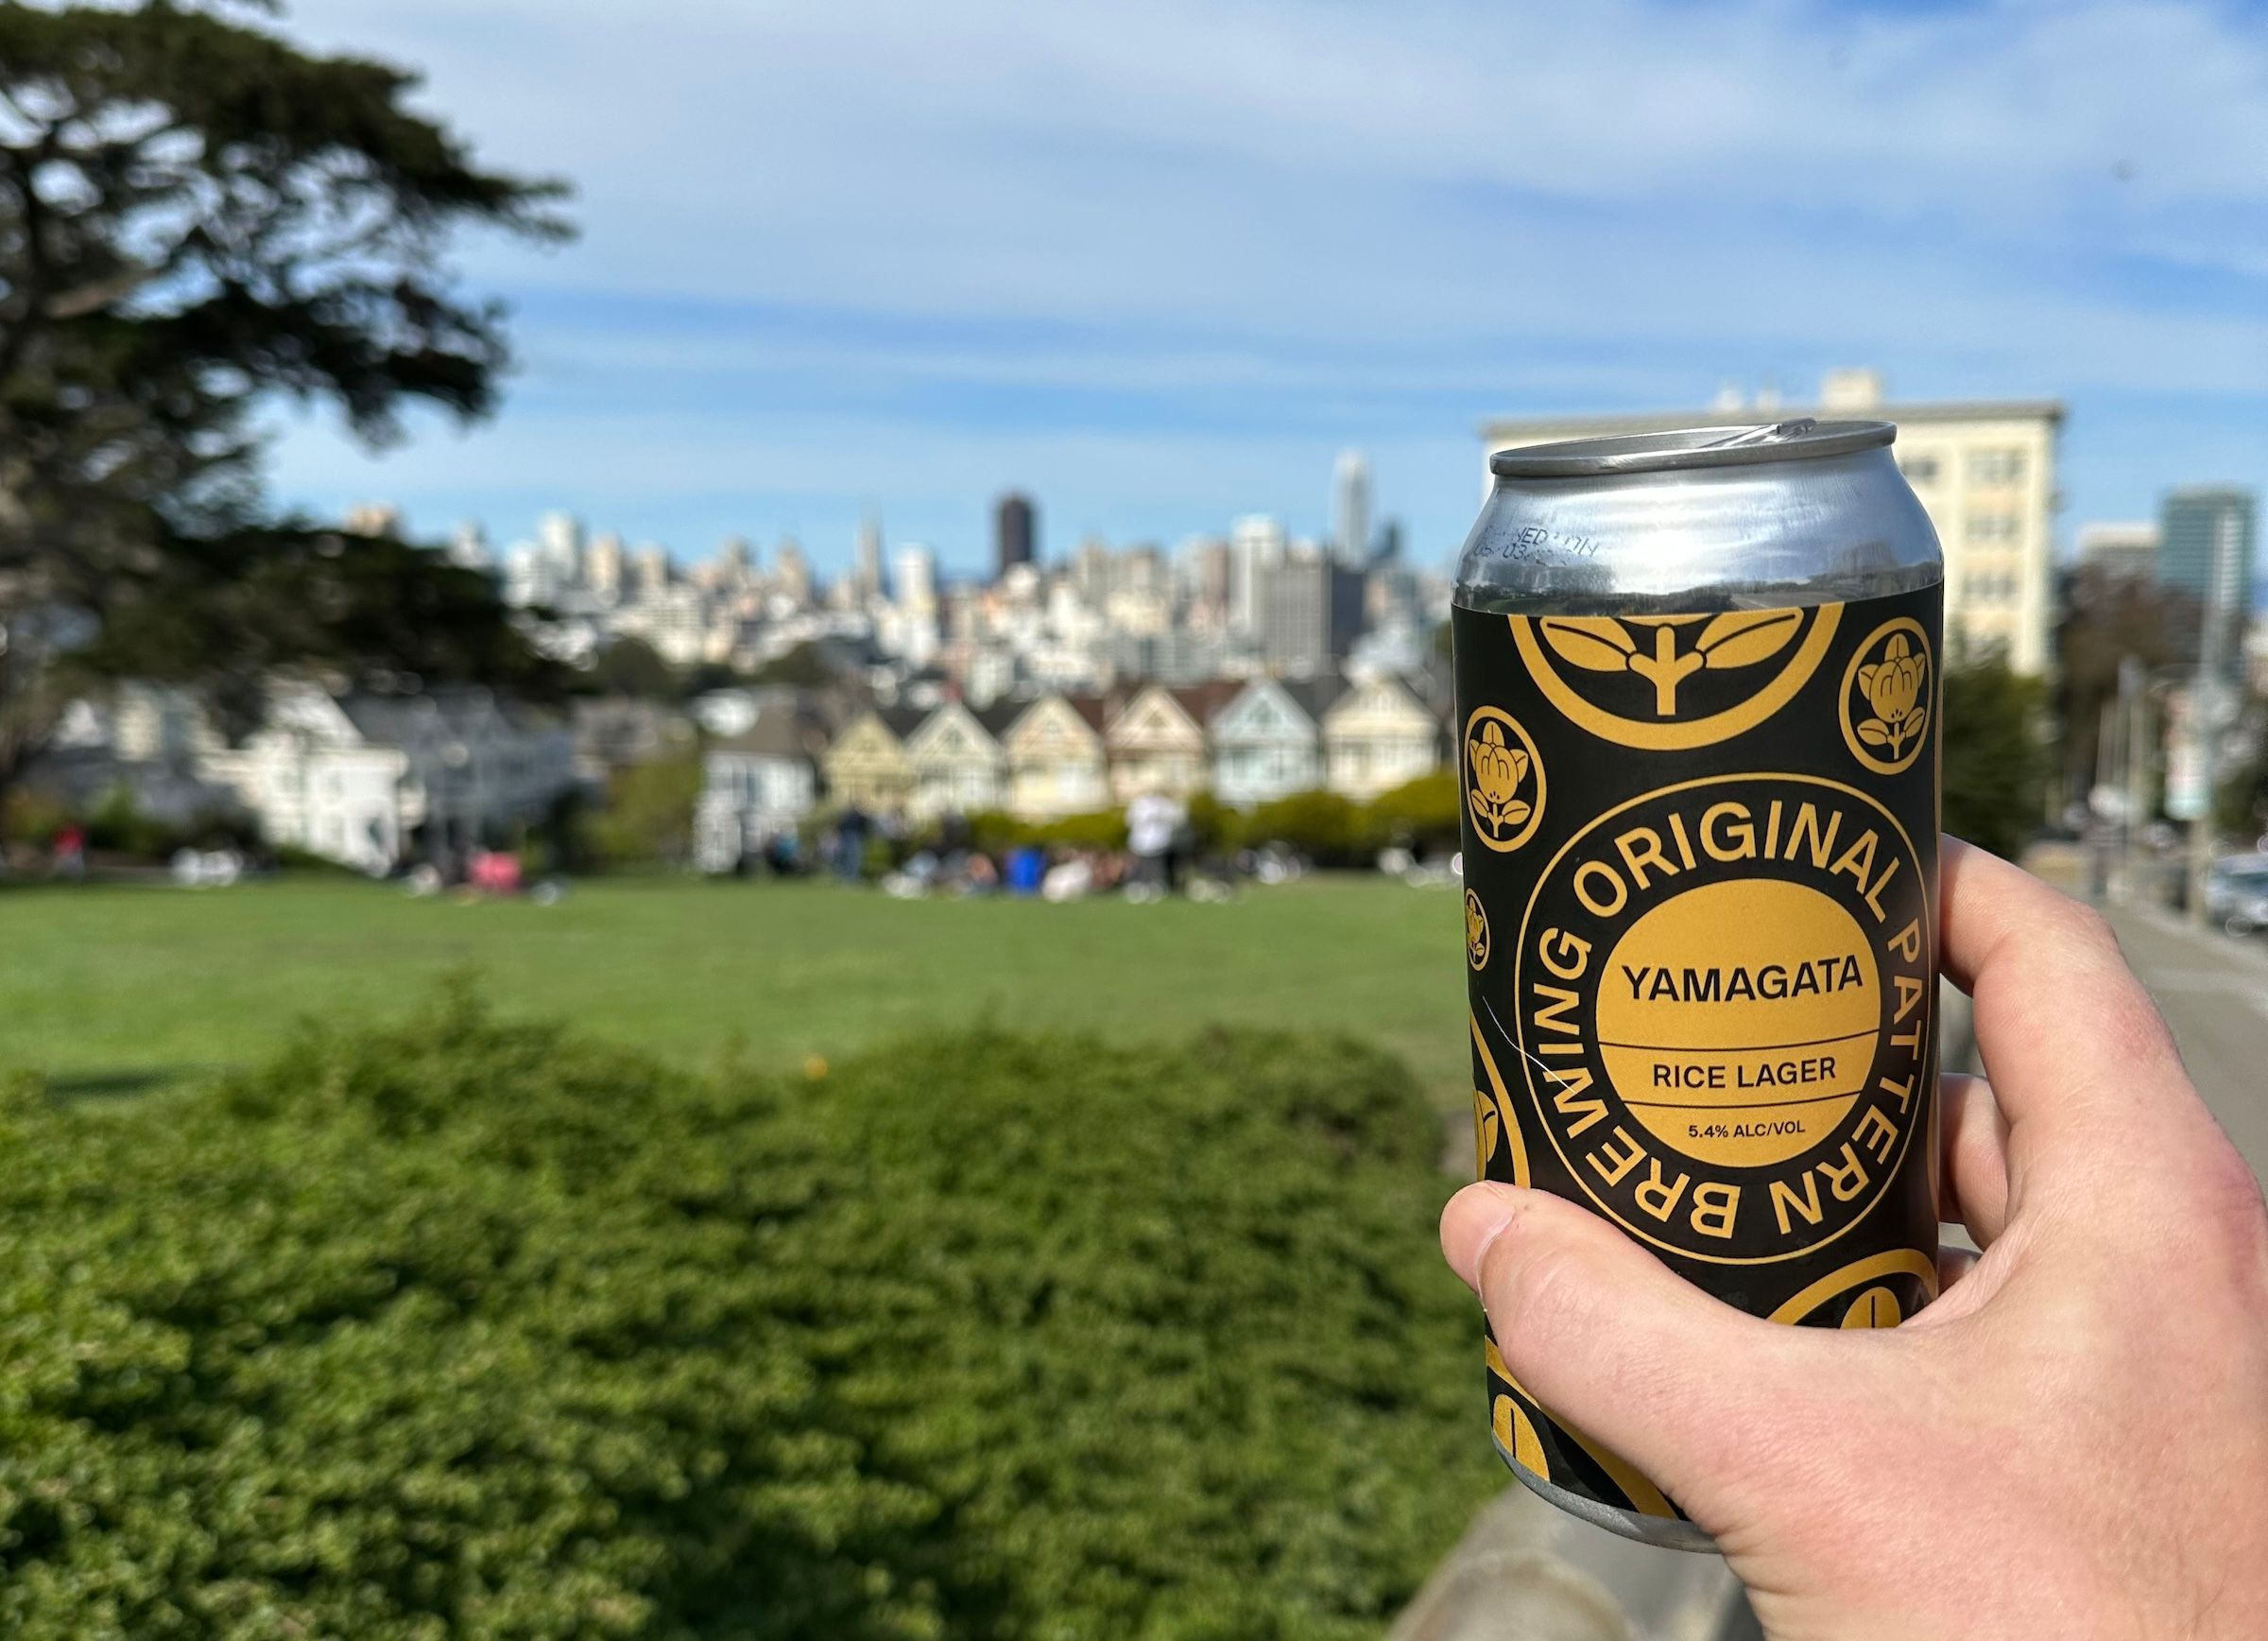 Rice Lager in Alamo Square? Yes, please.